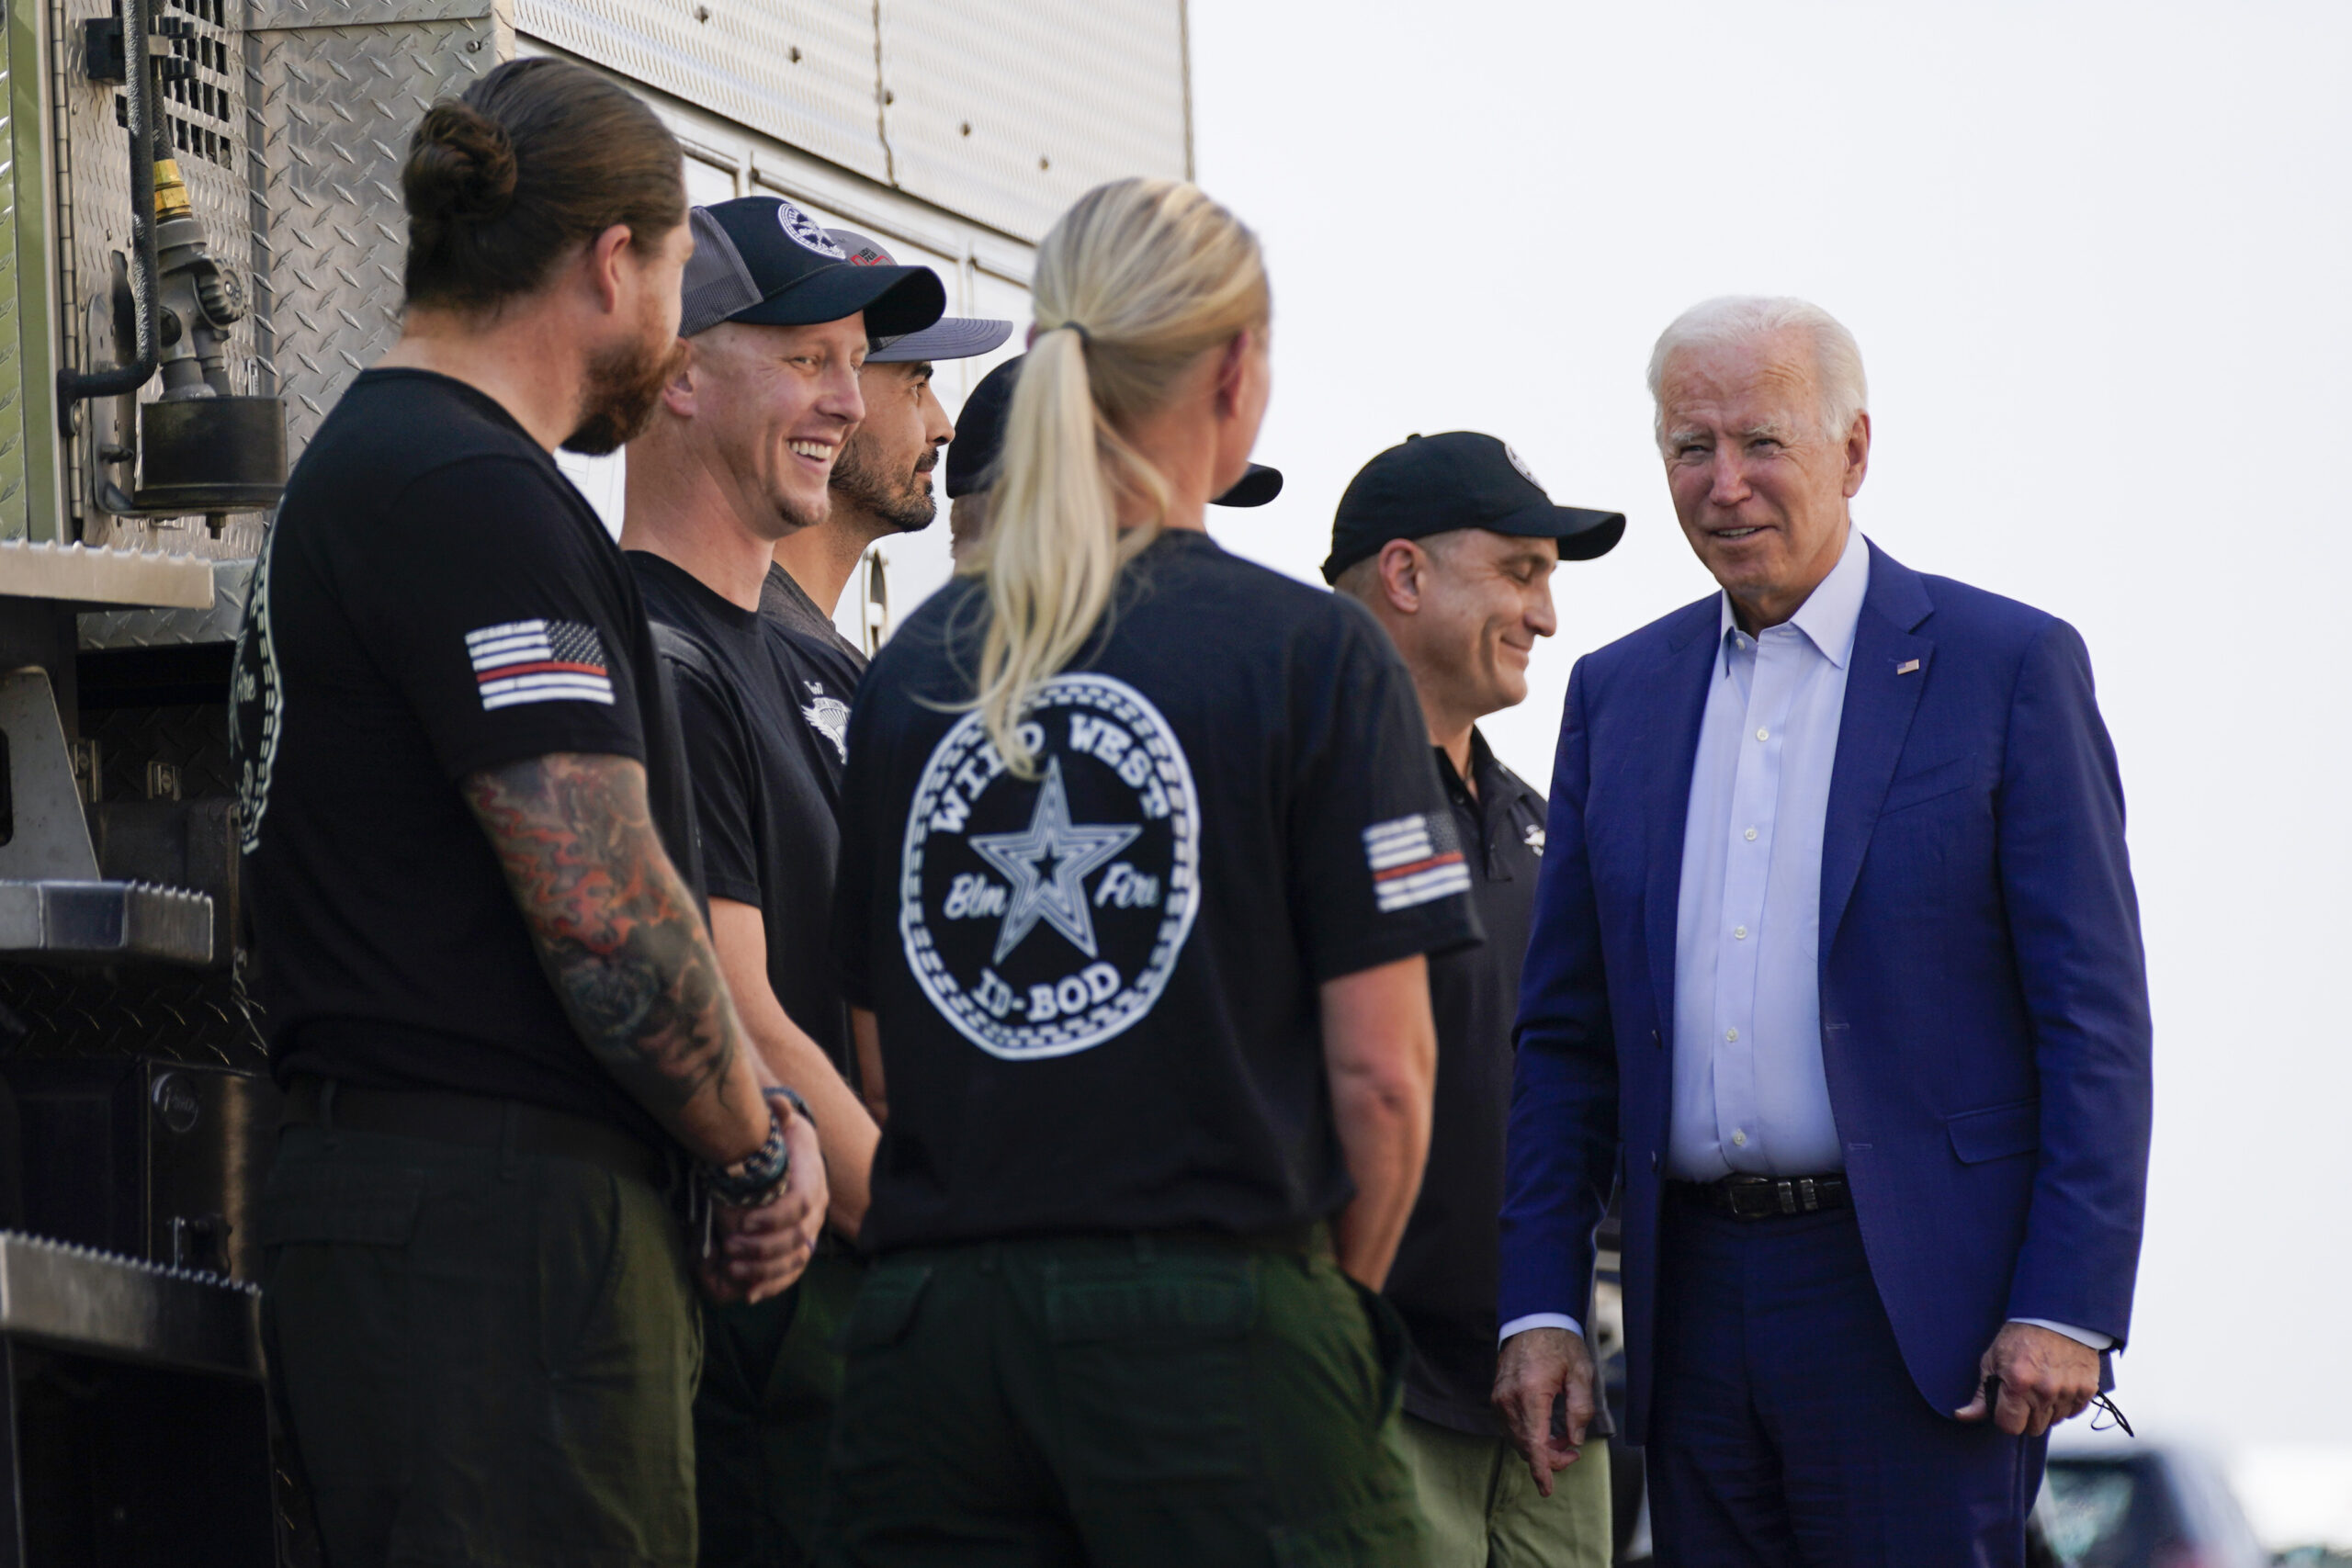 FILE - President Joe Biden greets firefighters as he tours the National Interagency Fire Center, Sept. 13, 2021, in Boise, Idaho. Biden on June 21, 2022, signed off on giving federal wildland firefighters a hefty raise for the next two fiscal years, a move that comes as much of the West is bracing for a difficult wildfire season. (AP Photo/Evan Vucci, File)